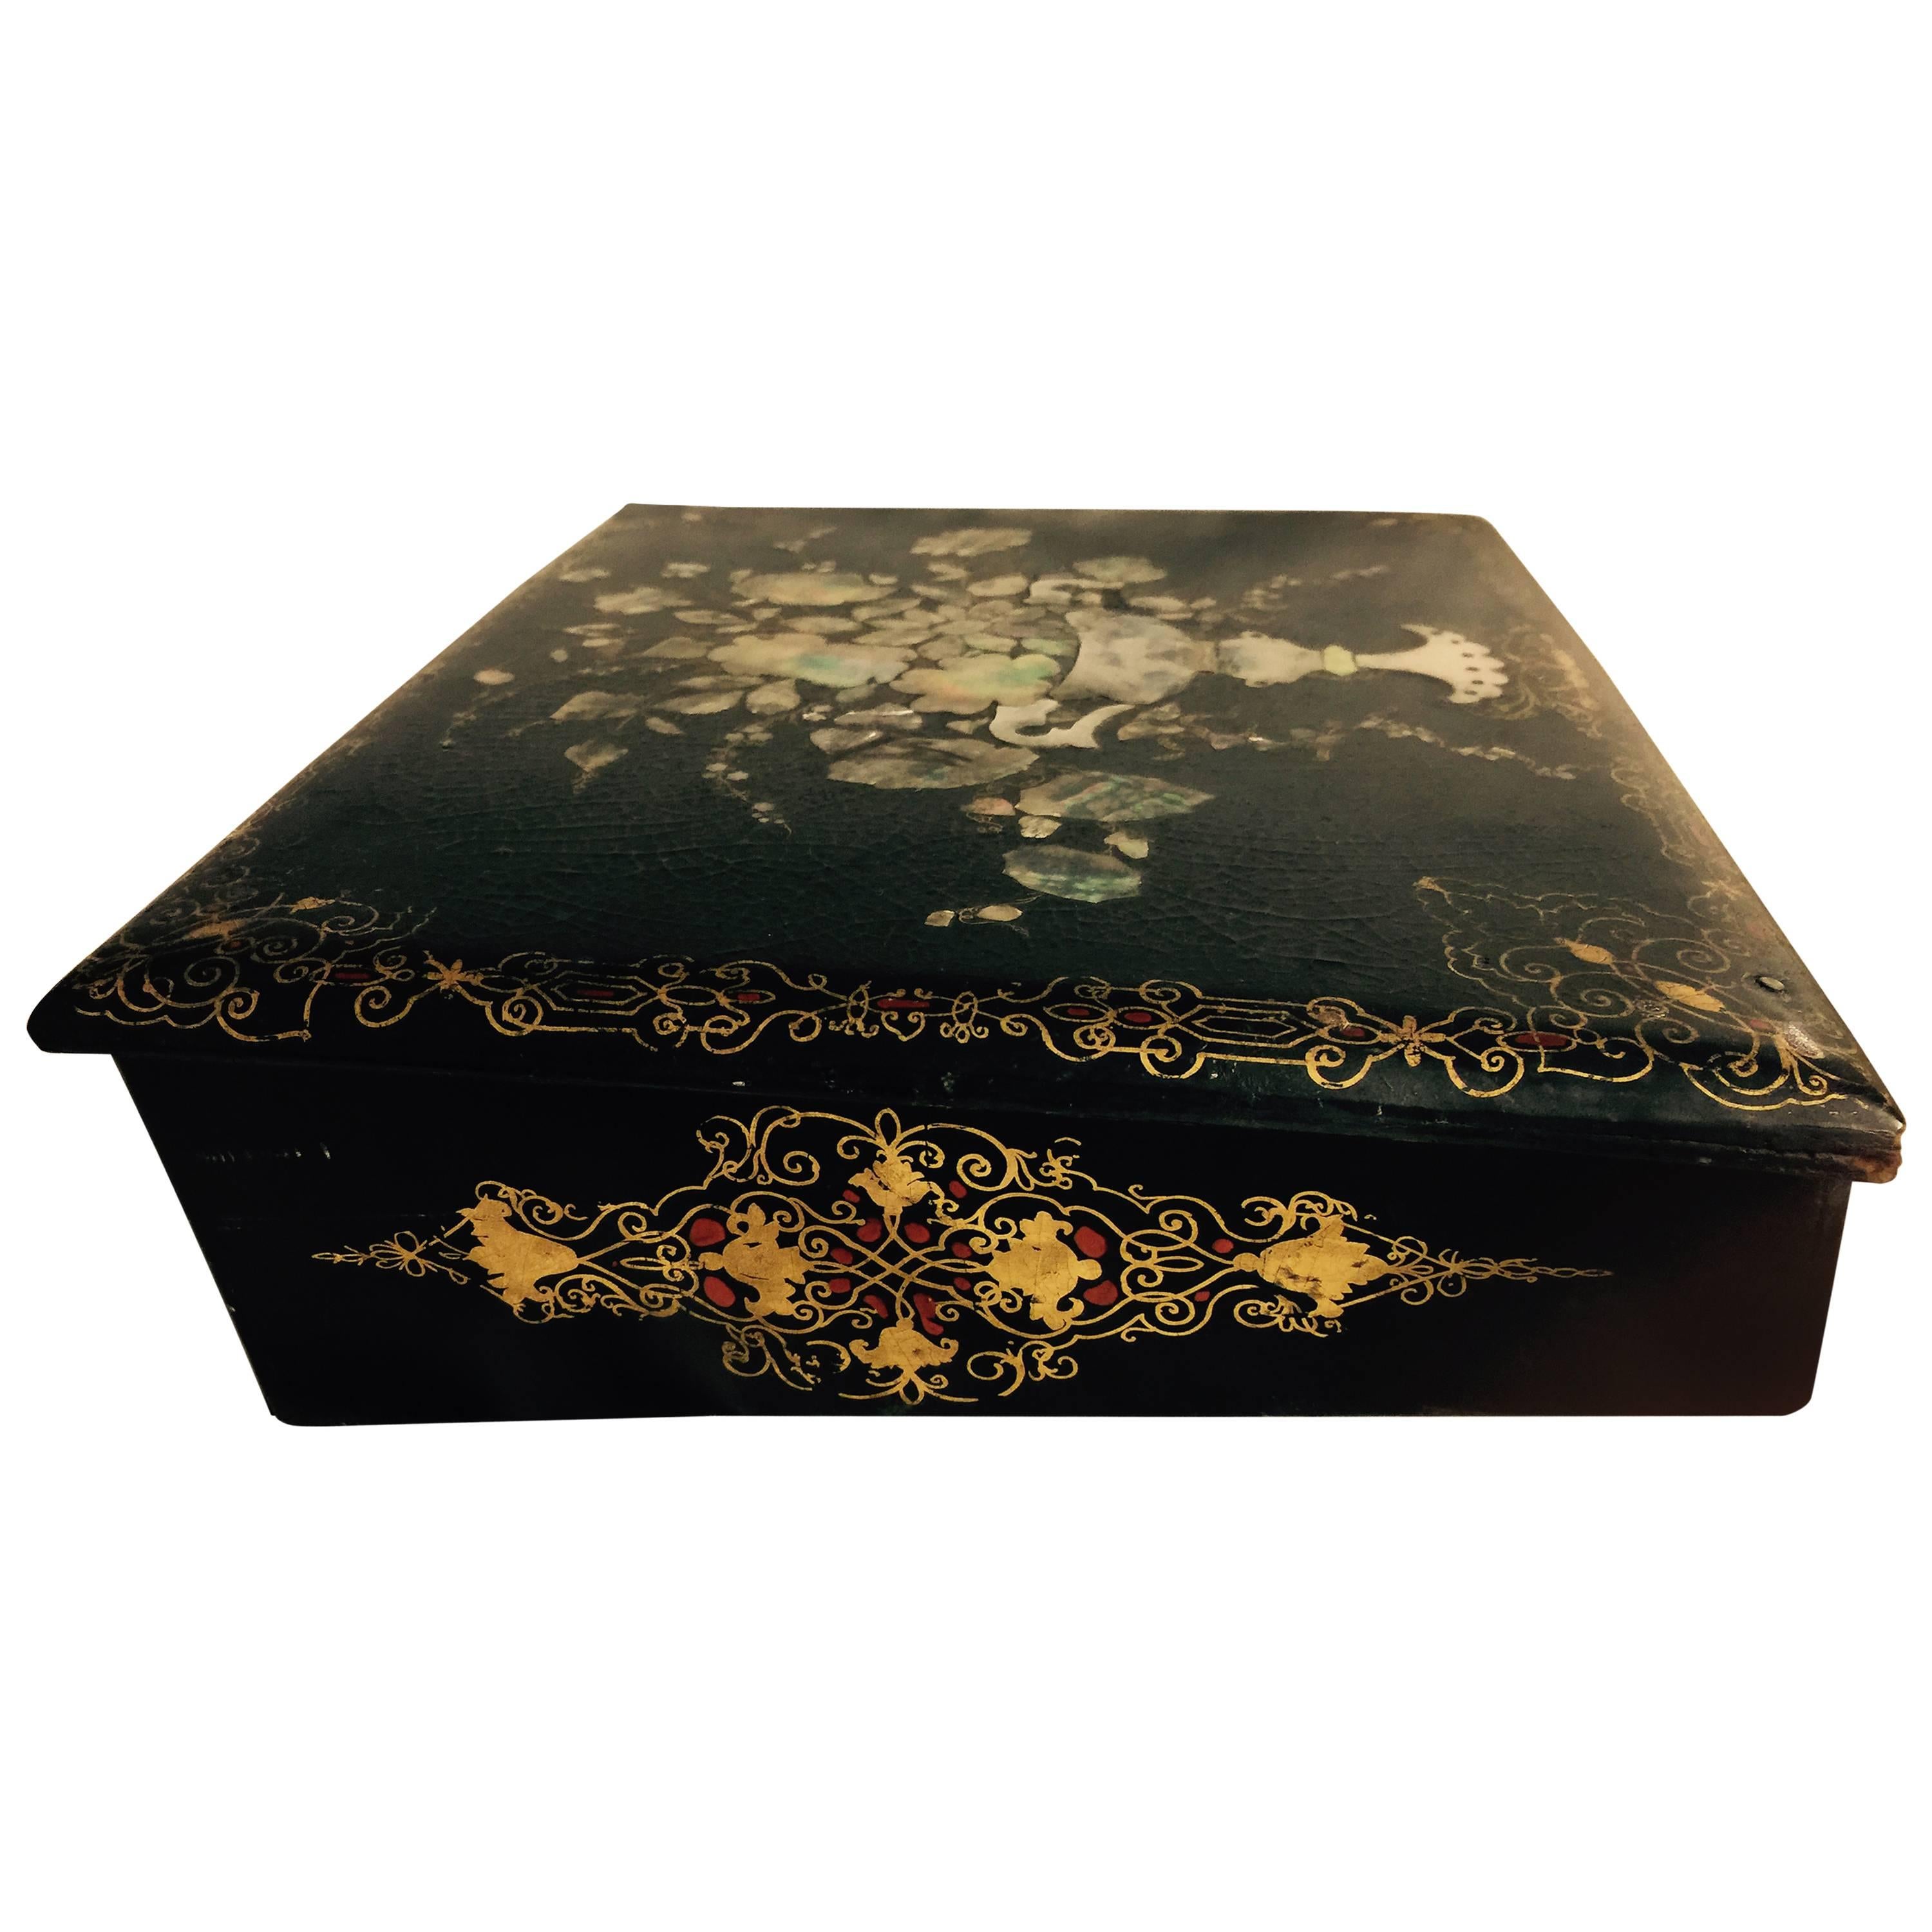  Lap Desk 19th Century English Papier Mache Decorated in Mother-of-Pearl